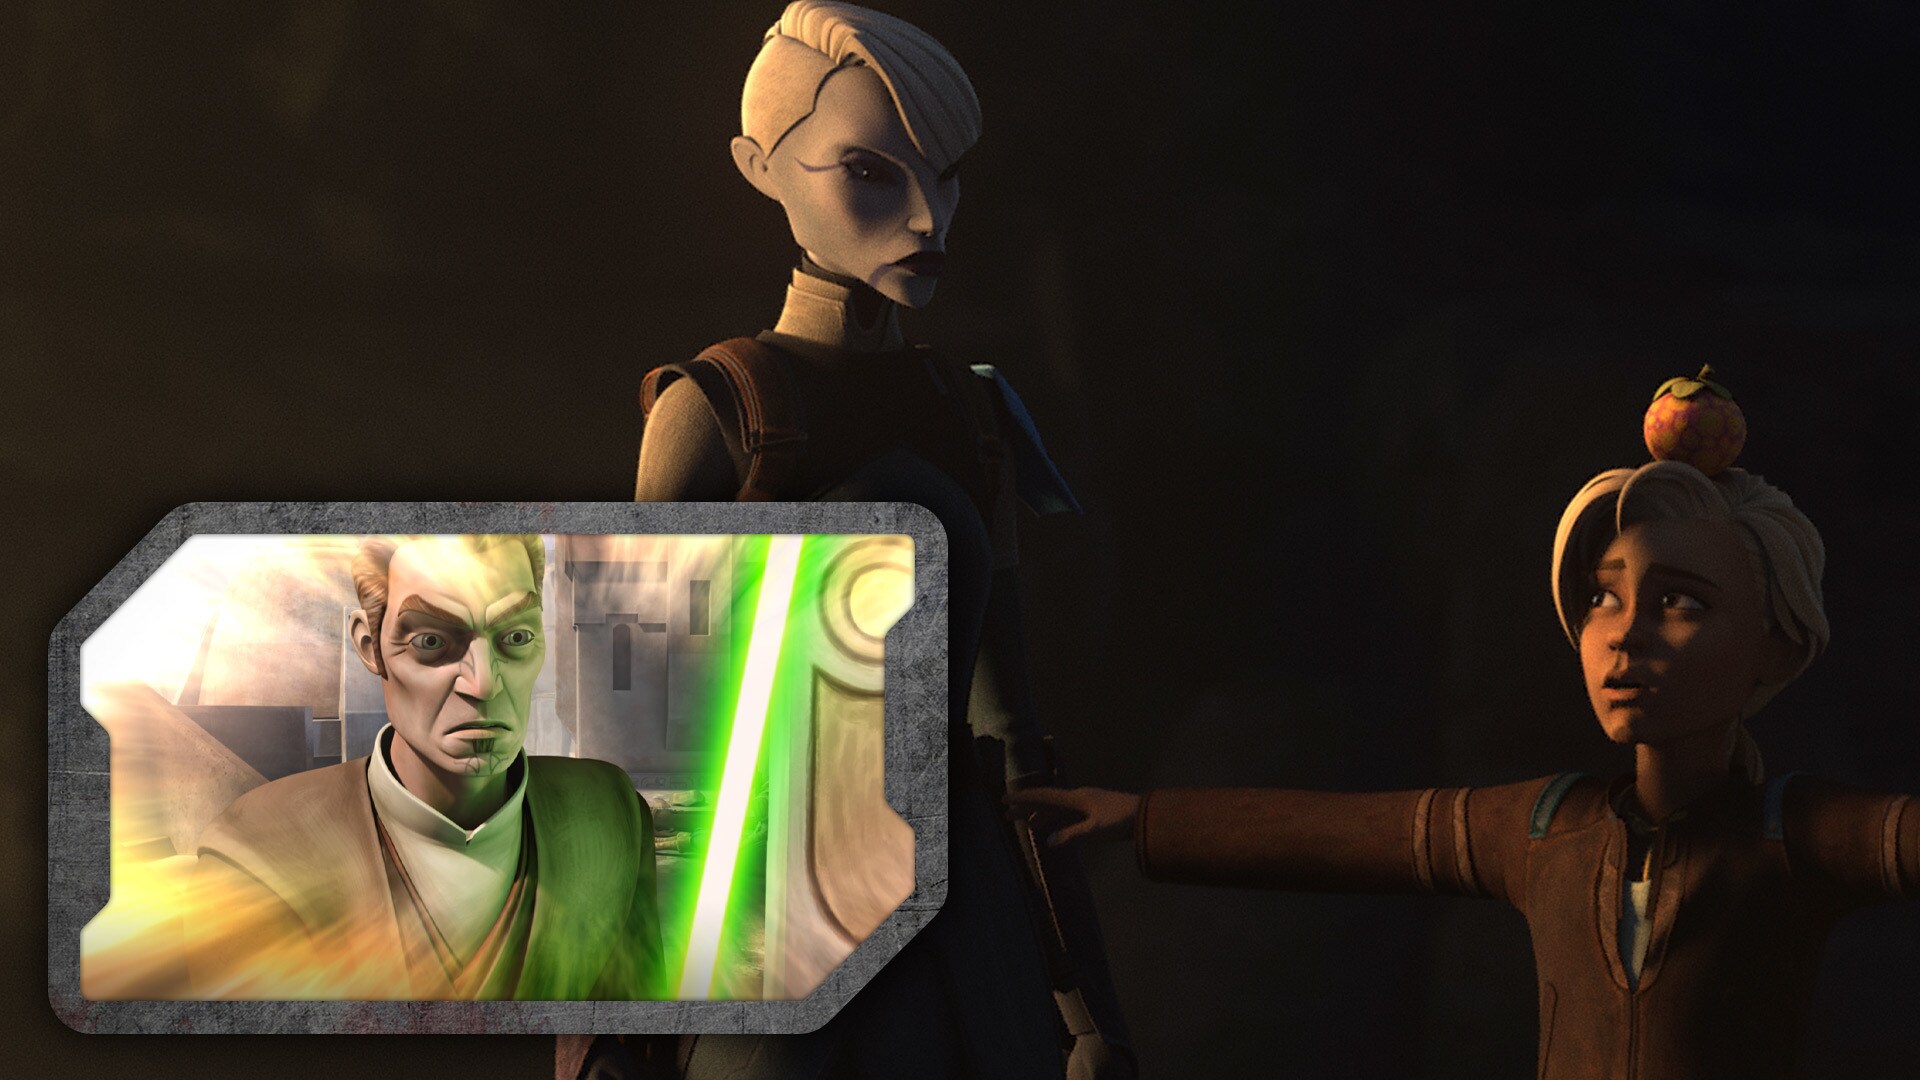 Ventress states that she “knows some of the Jedi ways.” She actually knows a bit more than she le...